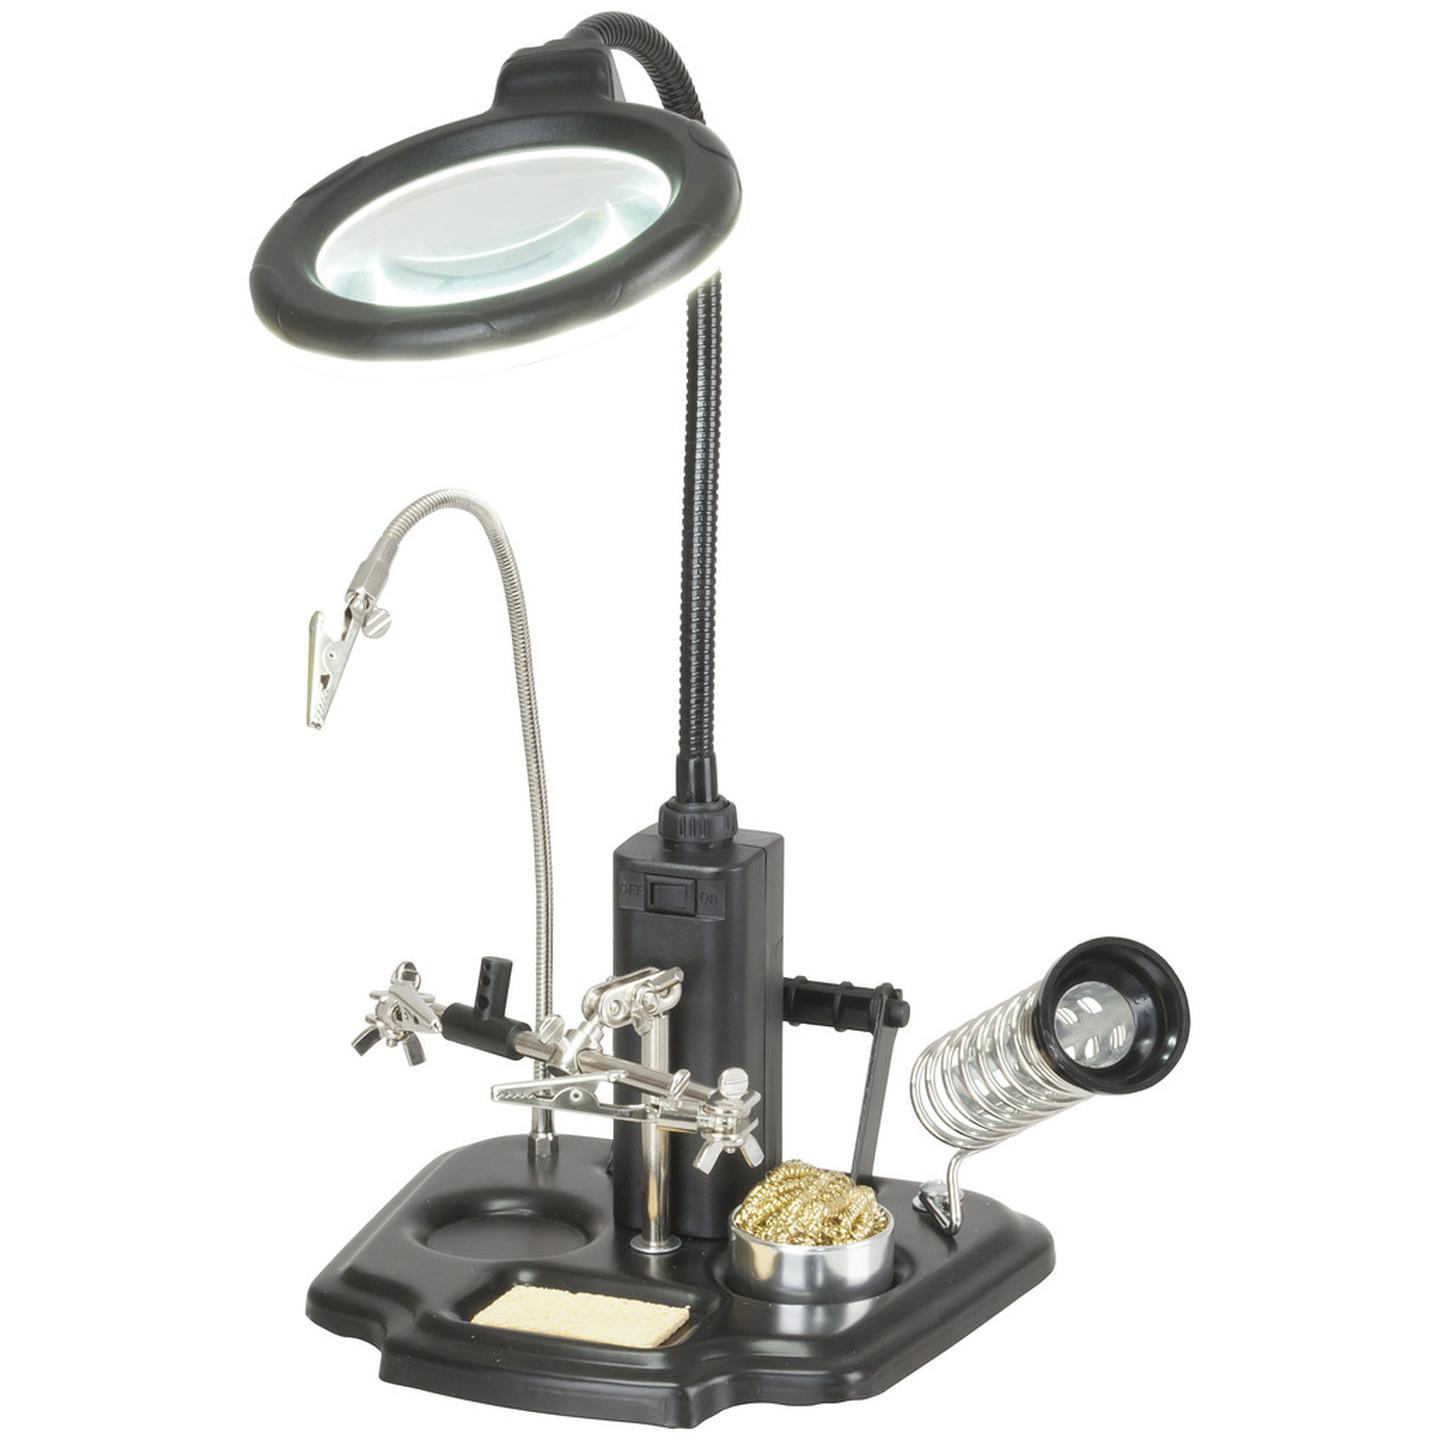 LED Magnifying lamp with third hand